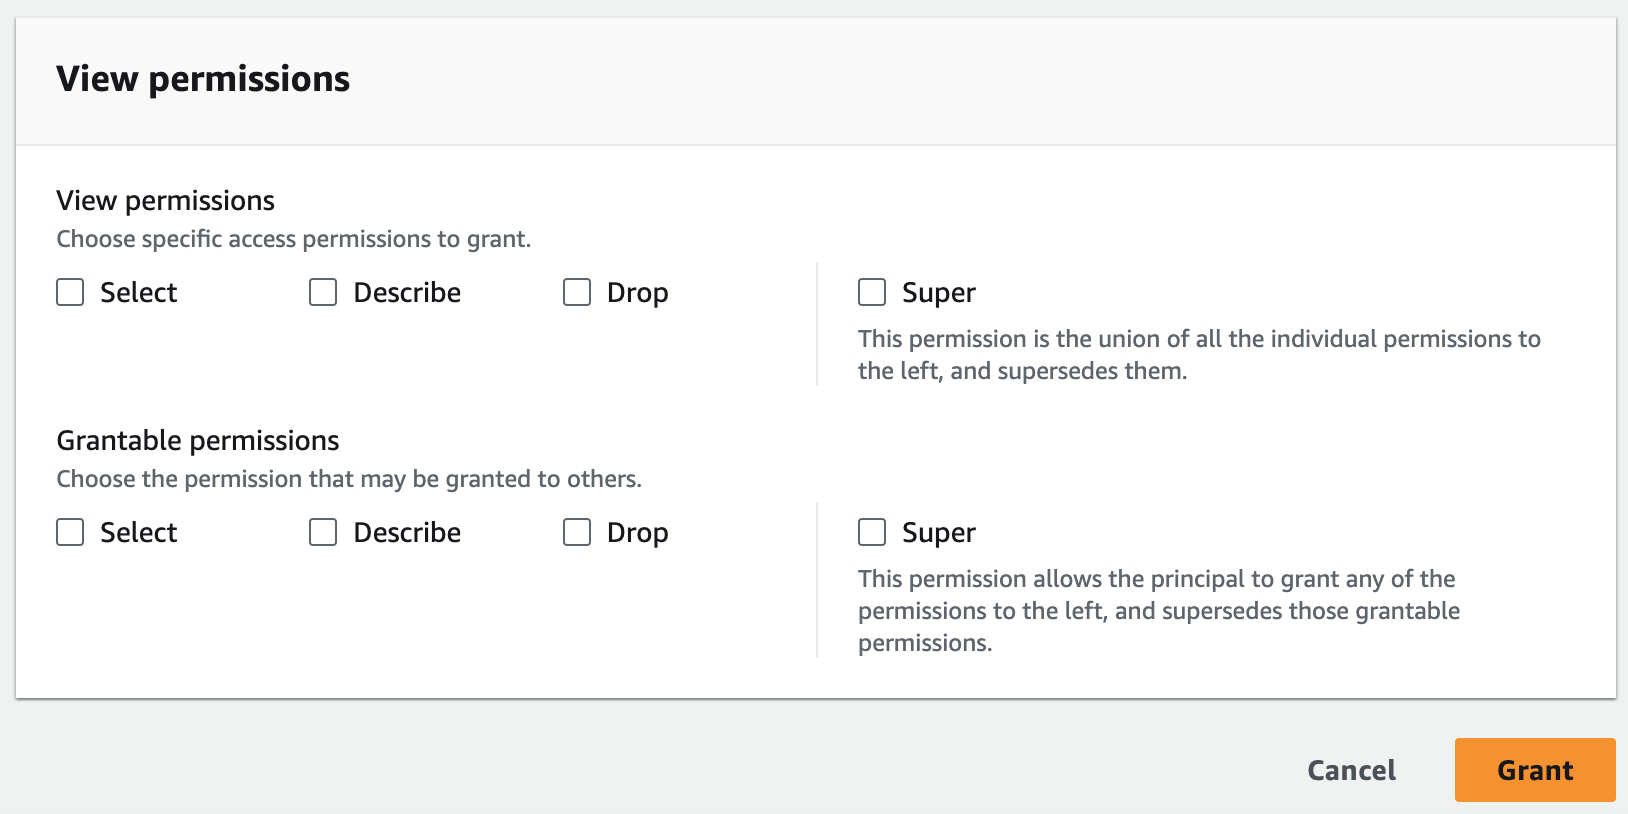 The Permissions section has a group of check boxes for view permissions to grant. Check boxes include Select, Describe, Drop, and Super. Below that group is another group of the same check boxes for grantable permissions.